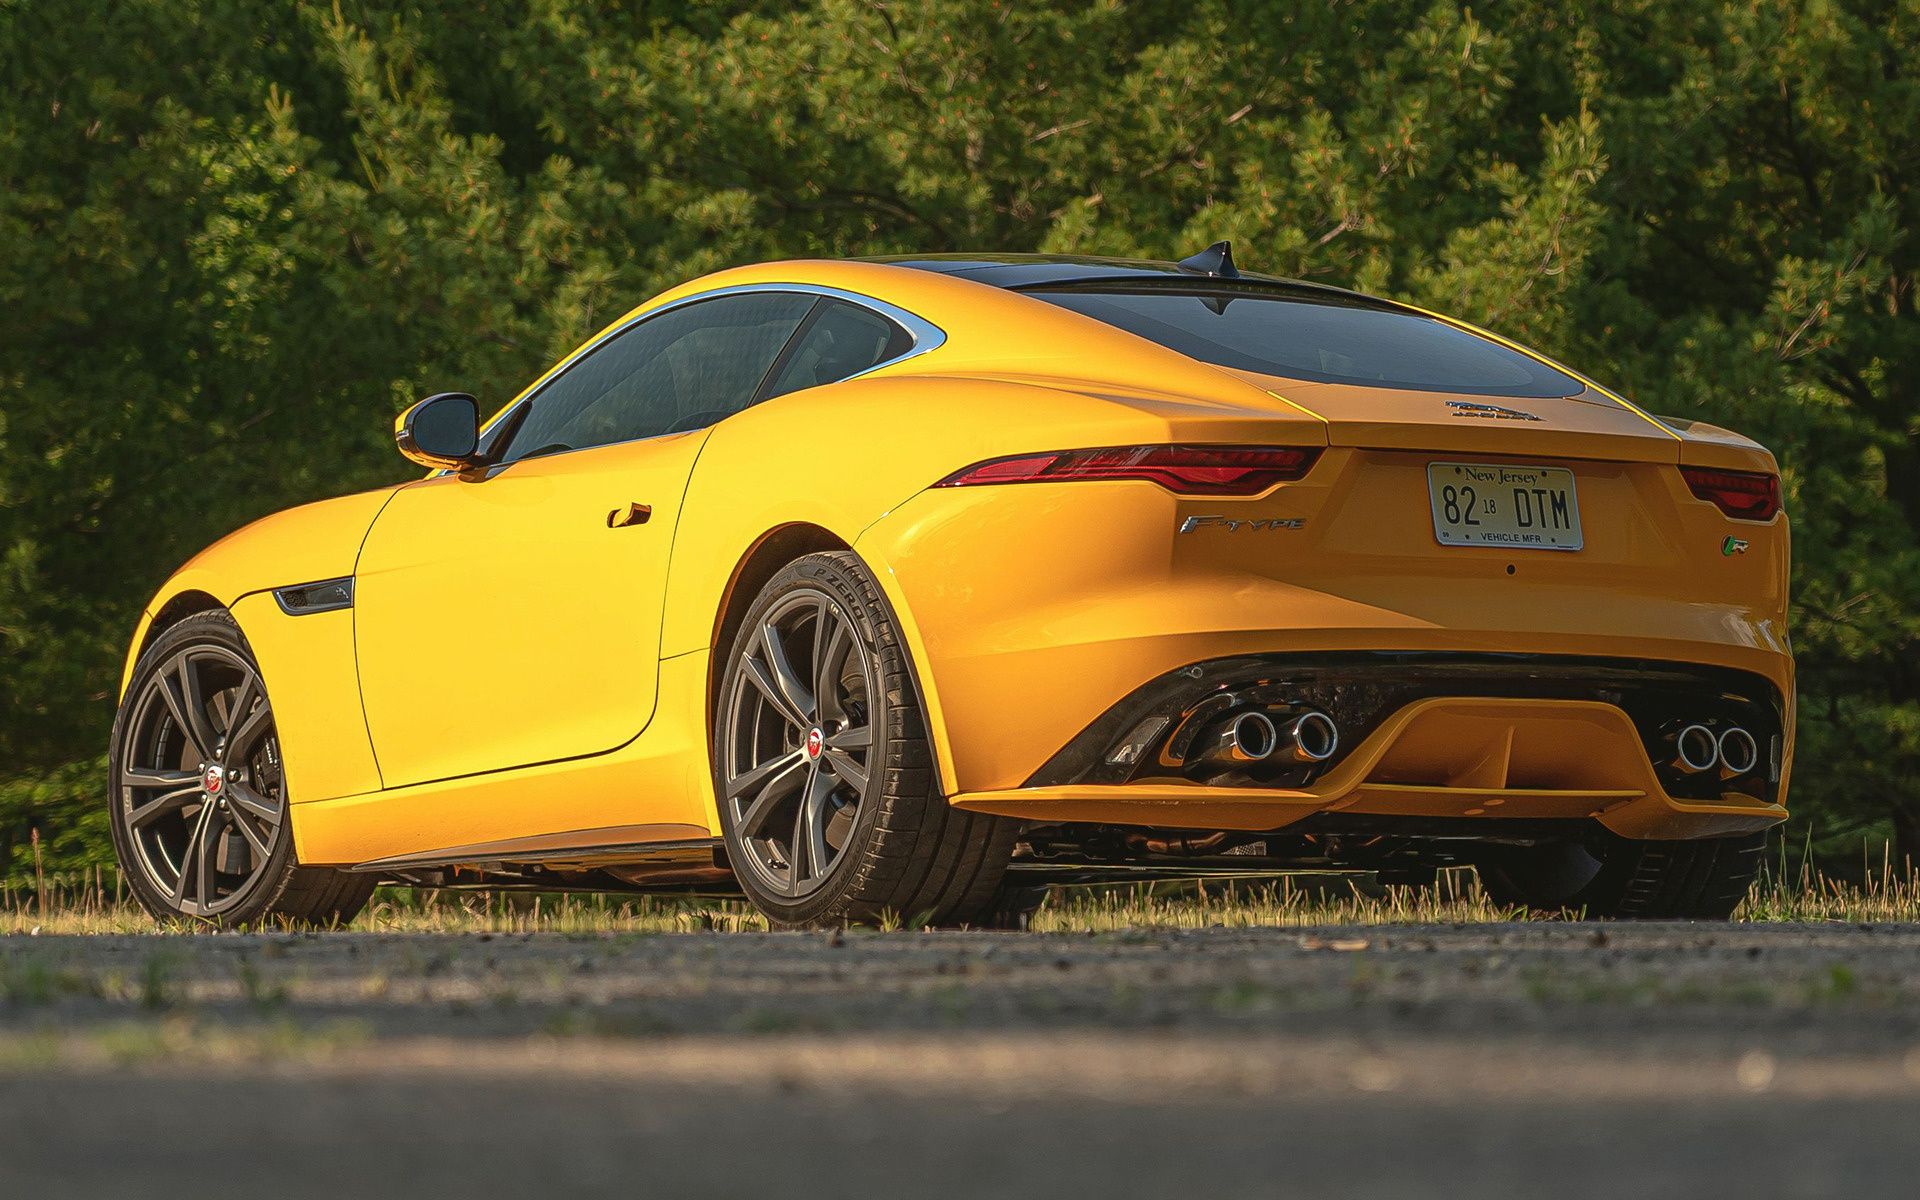 Jaguar F Type R Coupe (US) And HD Image